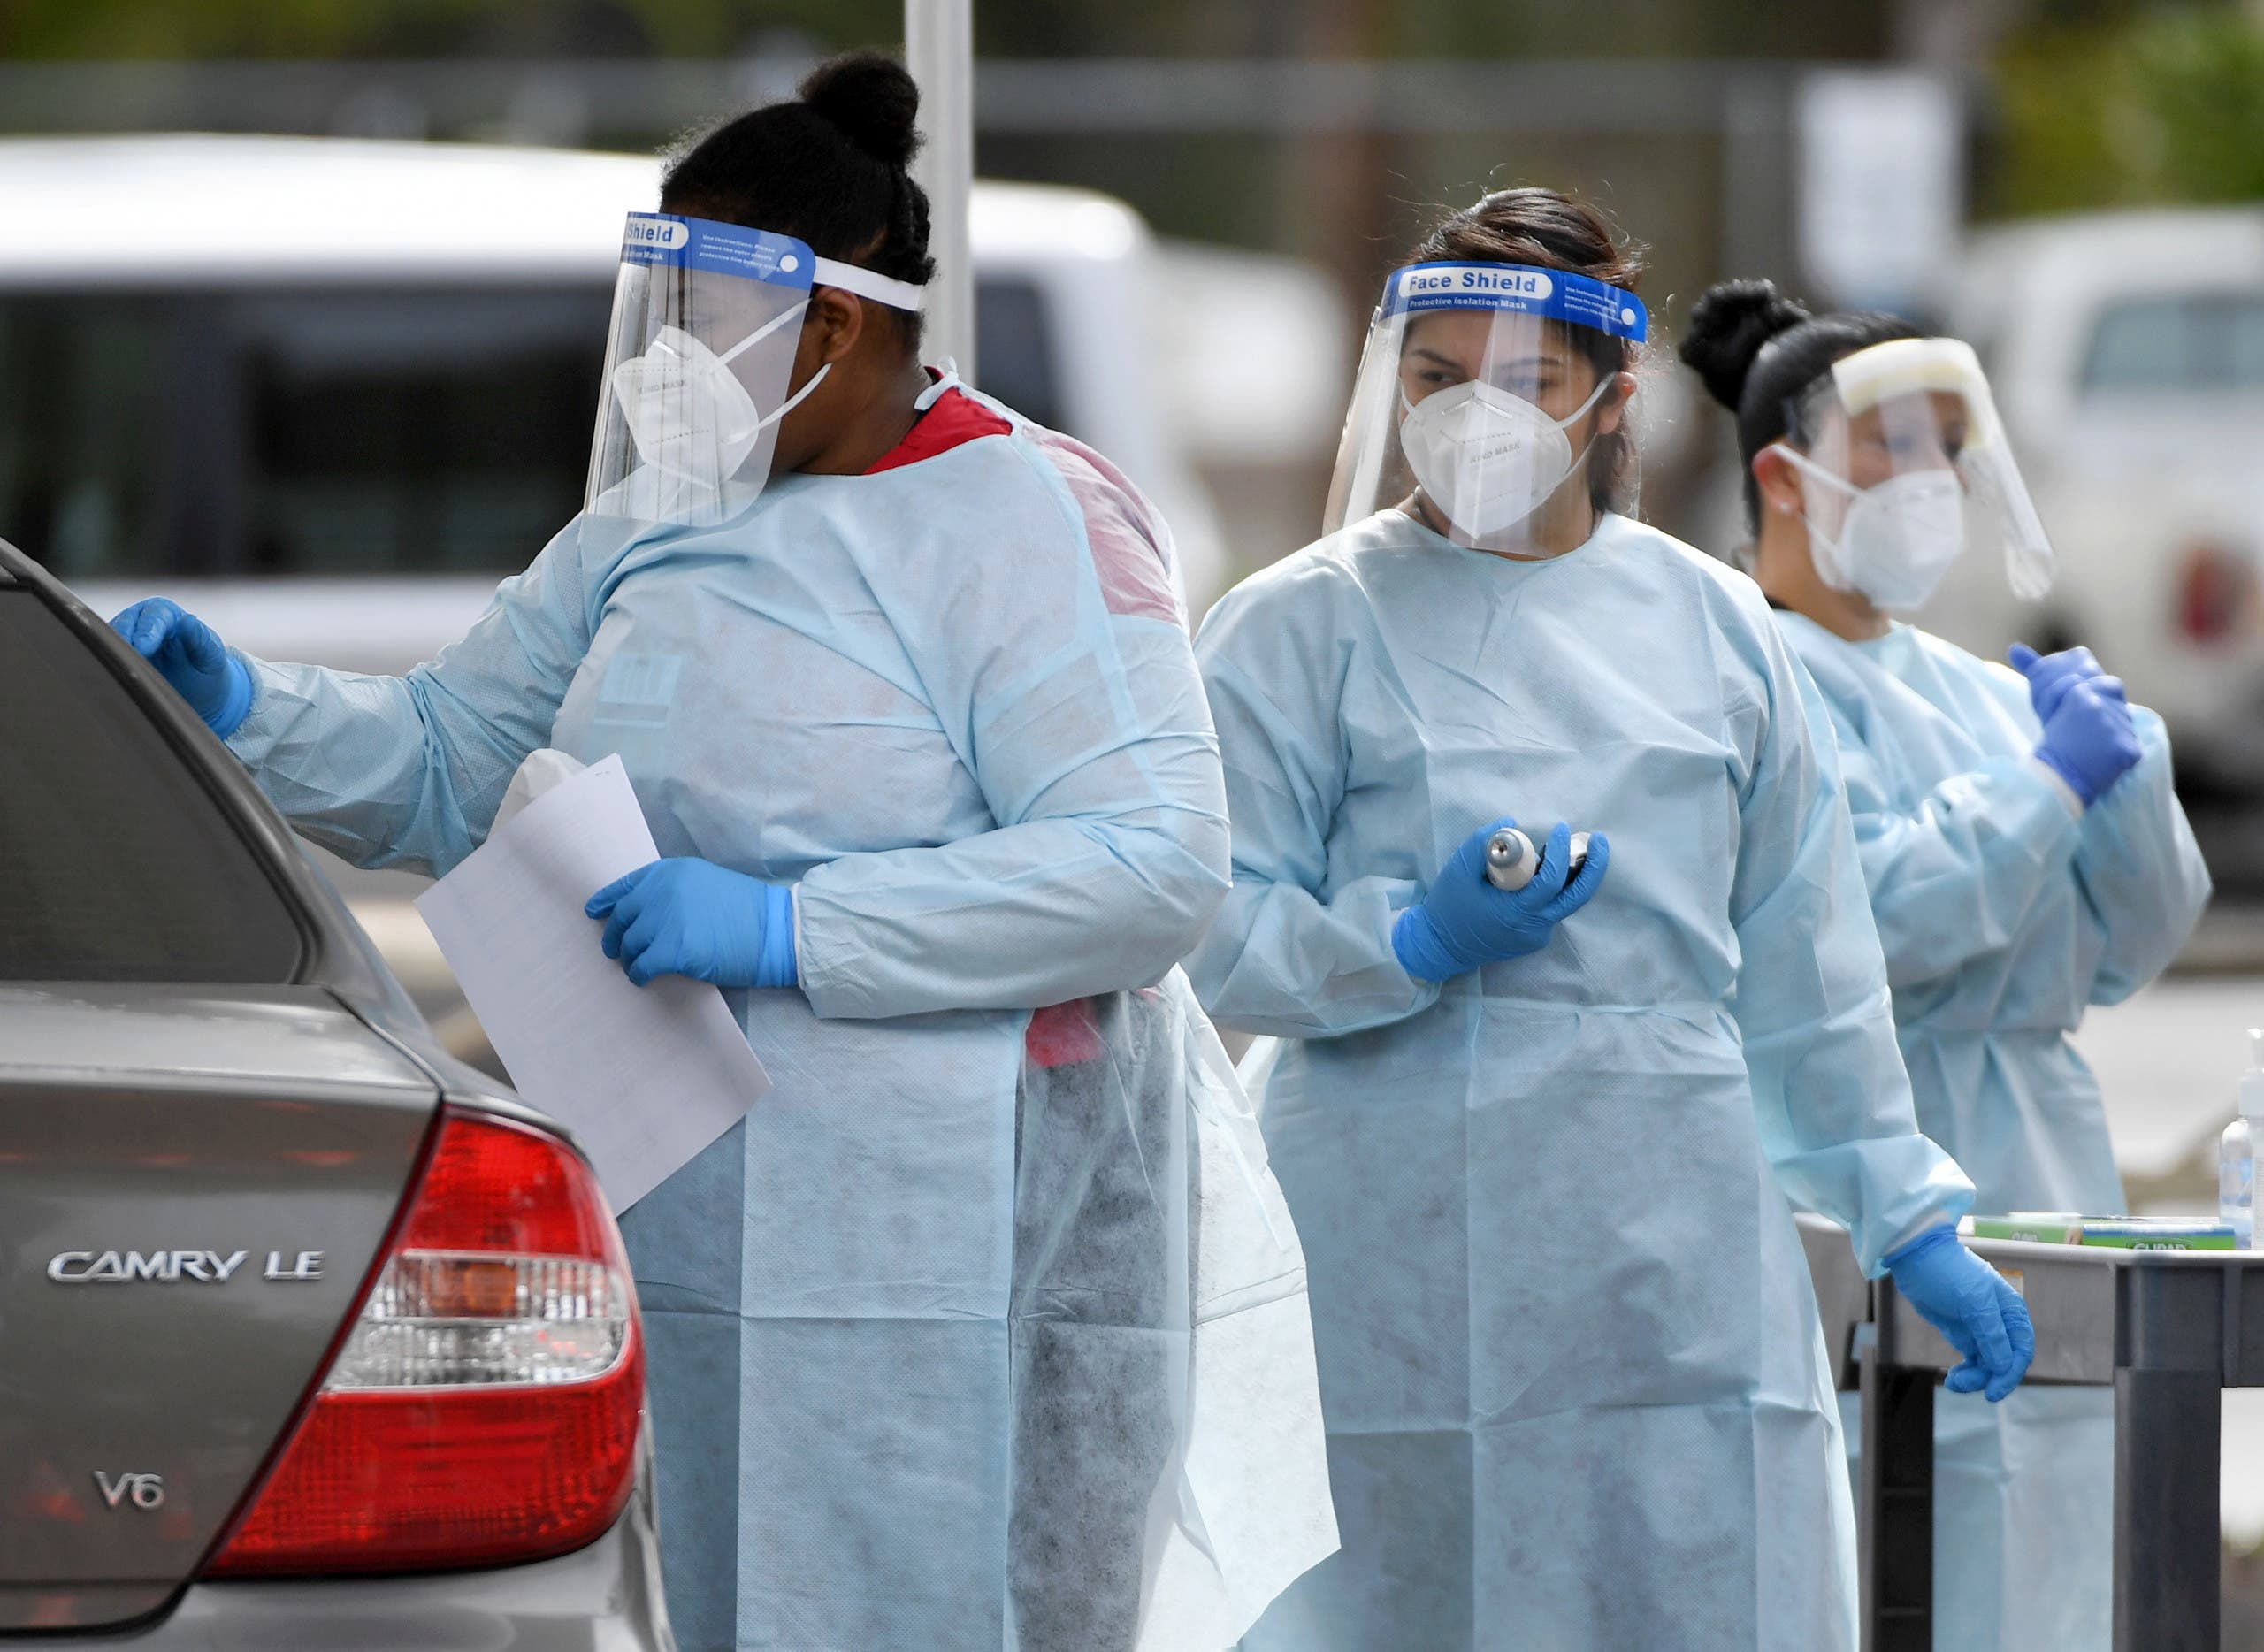 Certified medical assistants Lakietha Flourney, Yatziri Perez and Evelyn Laolagi conduct tests for COVID-19 at a drive-up testing station in the parking lot of UNLV Medicine on April 6, 2020 in Las Vegas, Nevada, US. (AFP)